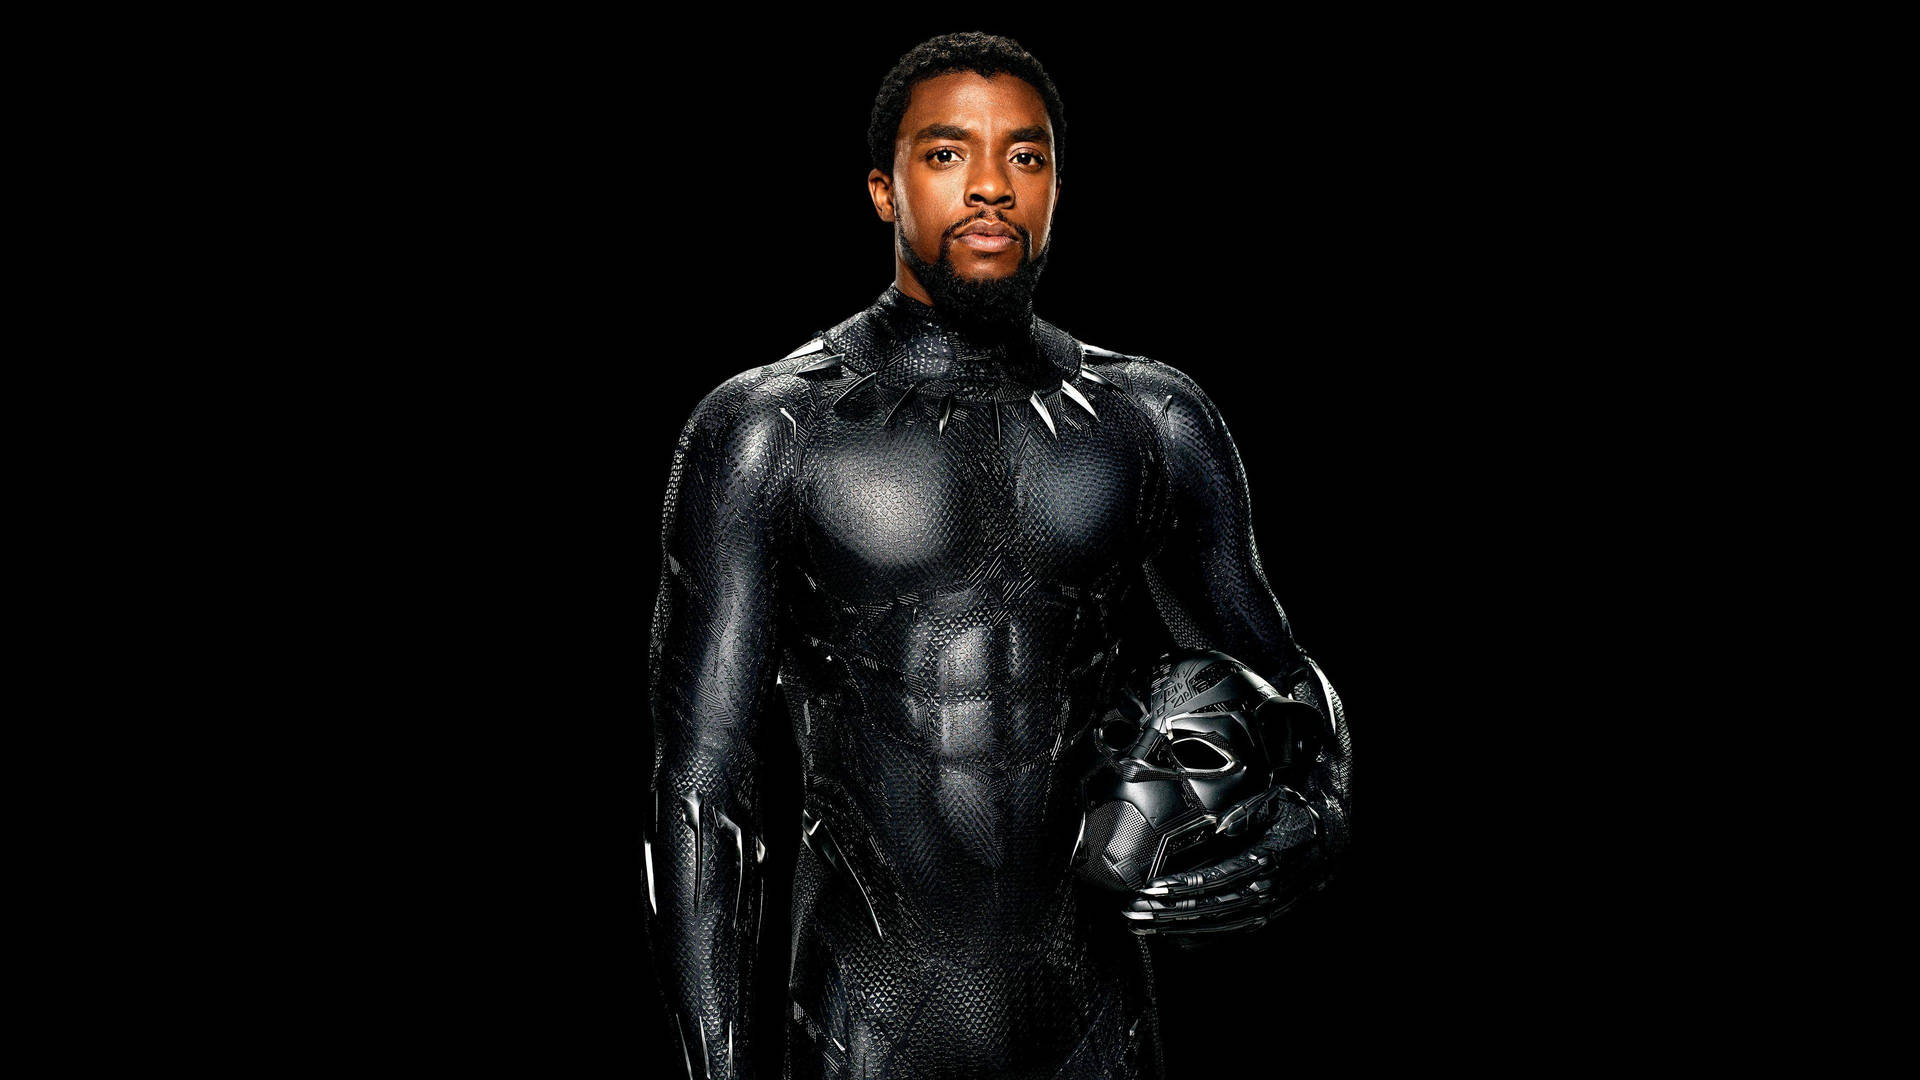 Chadwick Boseman In Character As Black Panther Background